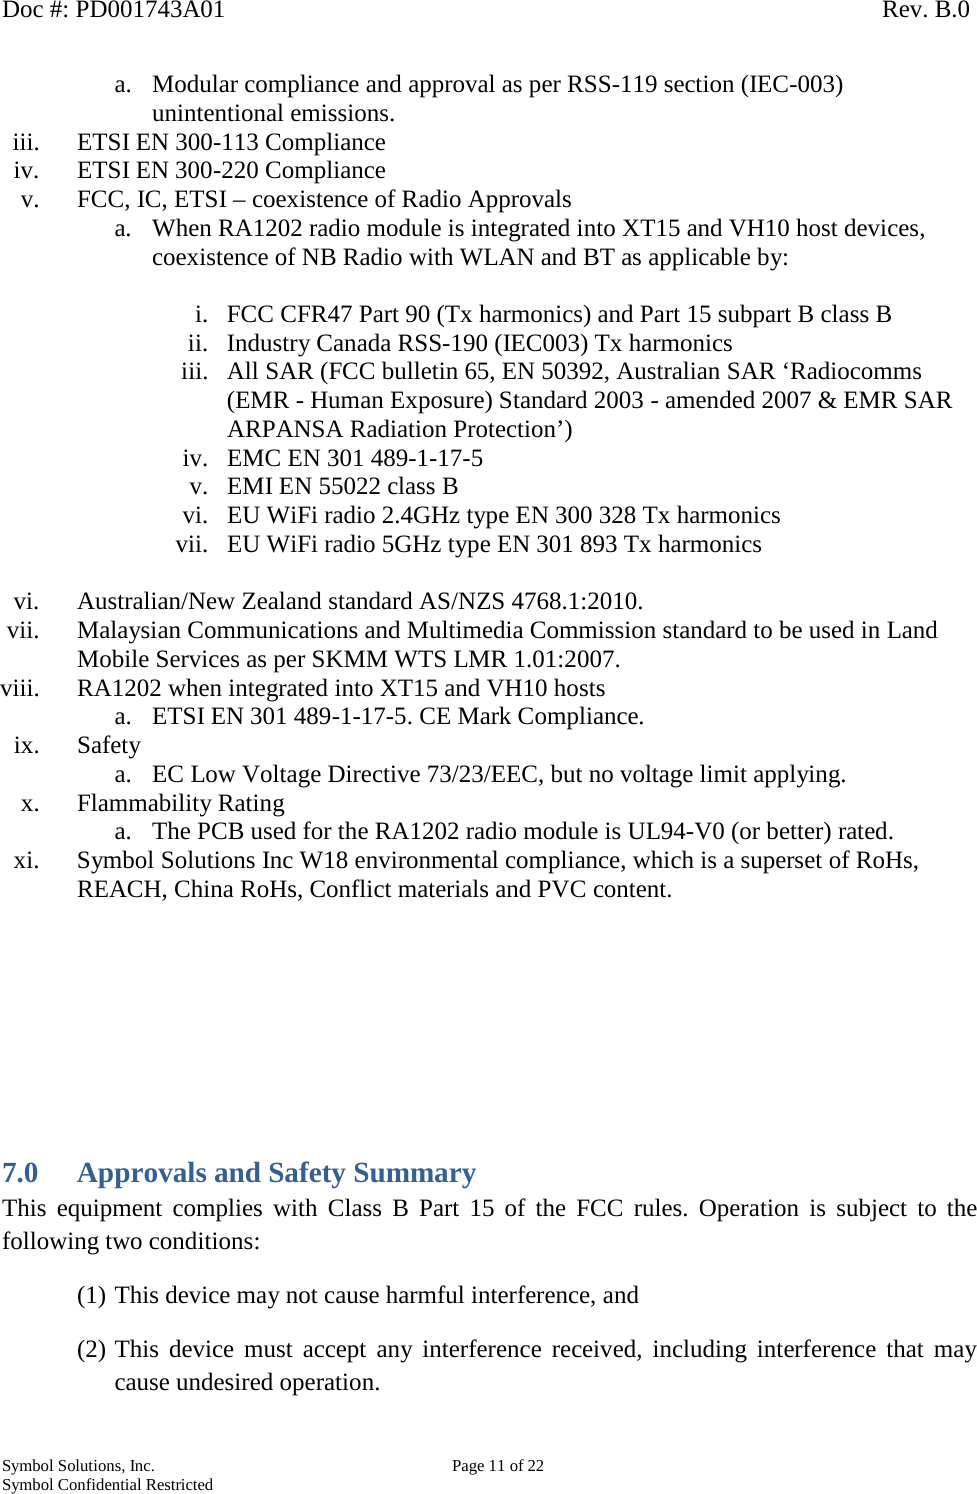 Doc #: PD001743A01                                                                                                         Rev. B.0 Symbol Solutions, Inc.    Page 11 of 22 Symbol Confidential Restricted   a. Modular compliance and approval as per RSS-119 section (IEC-003) unintentional emissions. iii. ETSI EN 300-113 Compliance iv. ETSI EN 300-220 Compliance v. FCC, IC, ETSI – coexistence of Radio Approvals a. When RA1202 radio module is integrated into XT15 and VH10 host devices, coexistence of NB Radio with WLAN and BT as applicable by:  i. FCC CFR47 Part 90 (Tx harmonics) and Part 15 subpart B class B ii. Industry Canada RSS-190 (IEC003) Tx harmonics iii. All SAR (FCC bulletin 65, EN 50392, Australian SAR ‘Radiocomms (EMR - Human Exposure) Standard 2003 - amended 2007 &amp; EMR SAR ARPANSA Radiation Protection’) iv. EMC EN 301 489-1-17-5 v. EMI EN 55022 class B vi. EU WiFi radio 2.4GHz type EN 300 328 Tx harmonics vii. EU WiFi radio 5GHz type EN 301 893 Tx harmonics  vi. Australian/New Zealand standard AS/NZS 4768.1:2010. vii. Malaysian Communications and Multimedia Commission standard to be used in Land Mobile Services as per SKMM WTS LMR 1.01:2007. viii. RA1202 when integrated into XT15 and VH10 hosts  a. ETSI EN 301 489-1-17-5. CE Mark Compliance. ix. Safety a. EC Low Voltage Directive 73/23/EEC, but no voltage limit applying. x. Flammability Rating a. The PCB used for the RA1202 radio module is UL94-V0 (or better) rated. xi. Symbol Solutions Inc W18 environmental compliance, which is a superset of RoHs, REACH, China RoHs, Conflict materials and PVC content.         7.0 Approvals and Safety Summary This equipment complies with Class B Part 15 of the FCC rules. Operation is subject to the following two conditions: (1) This device may not cause harmful interference, and (2) This device must accept any interference received, including interference that may cause undesired operation. 